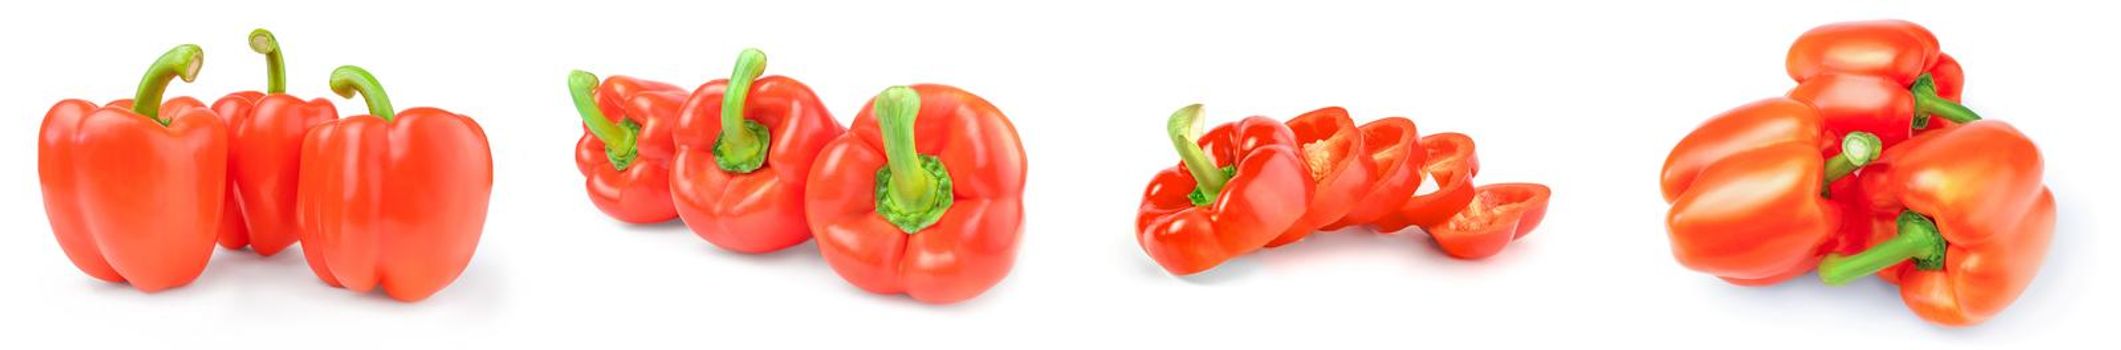 Collection of bell peppers isolated on a white background cutout